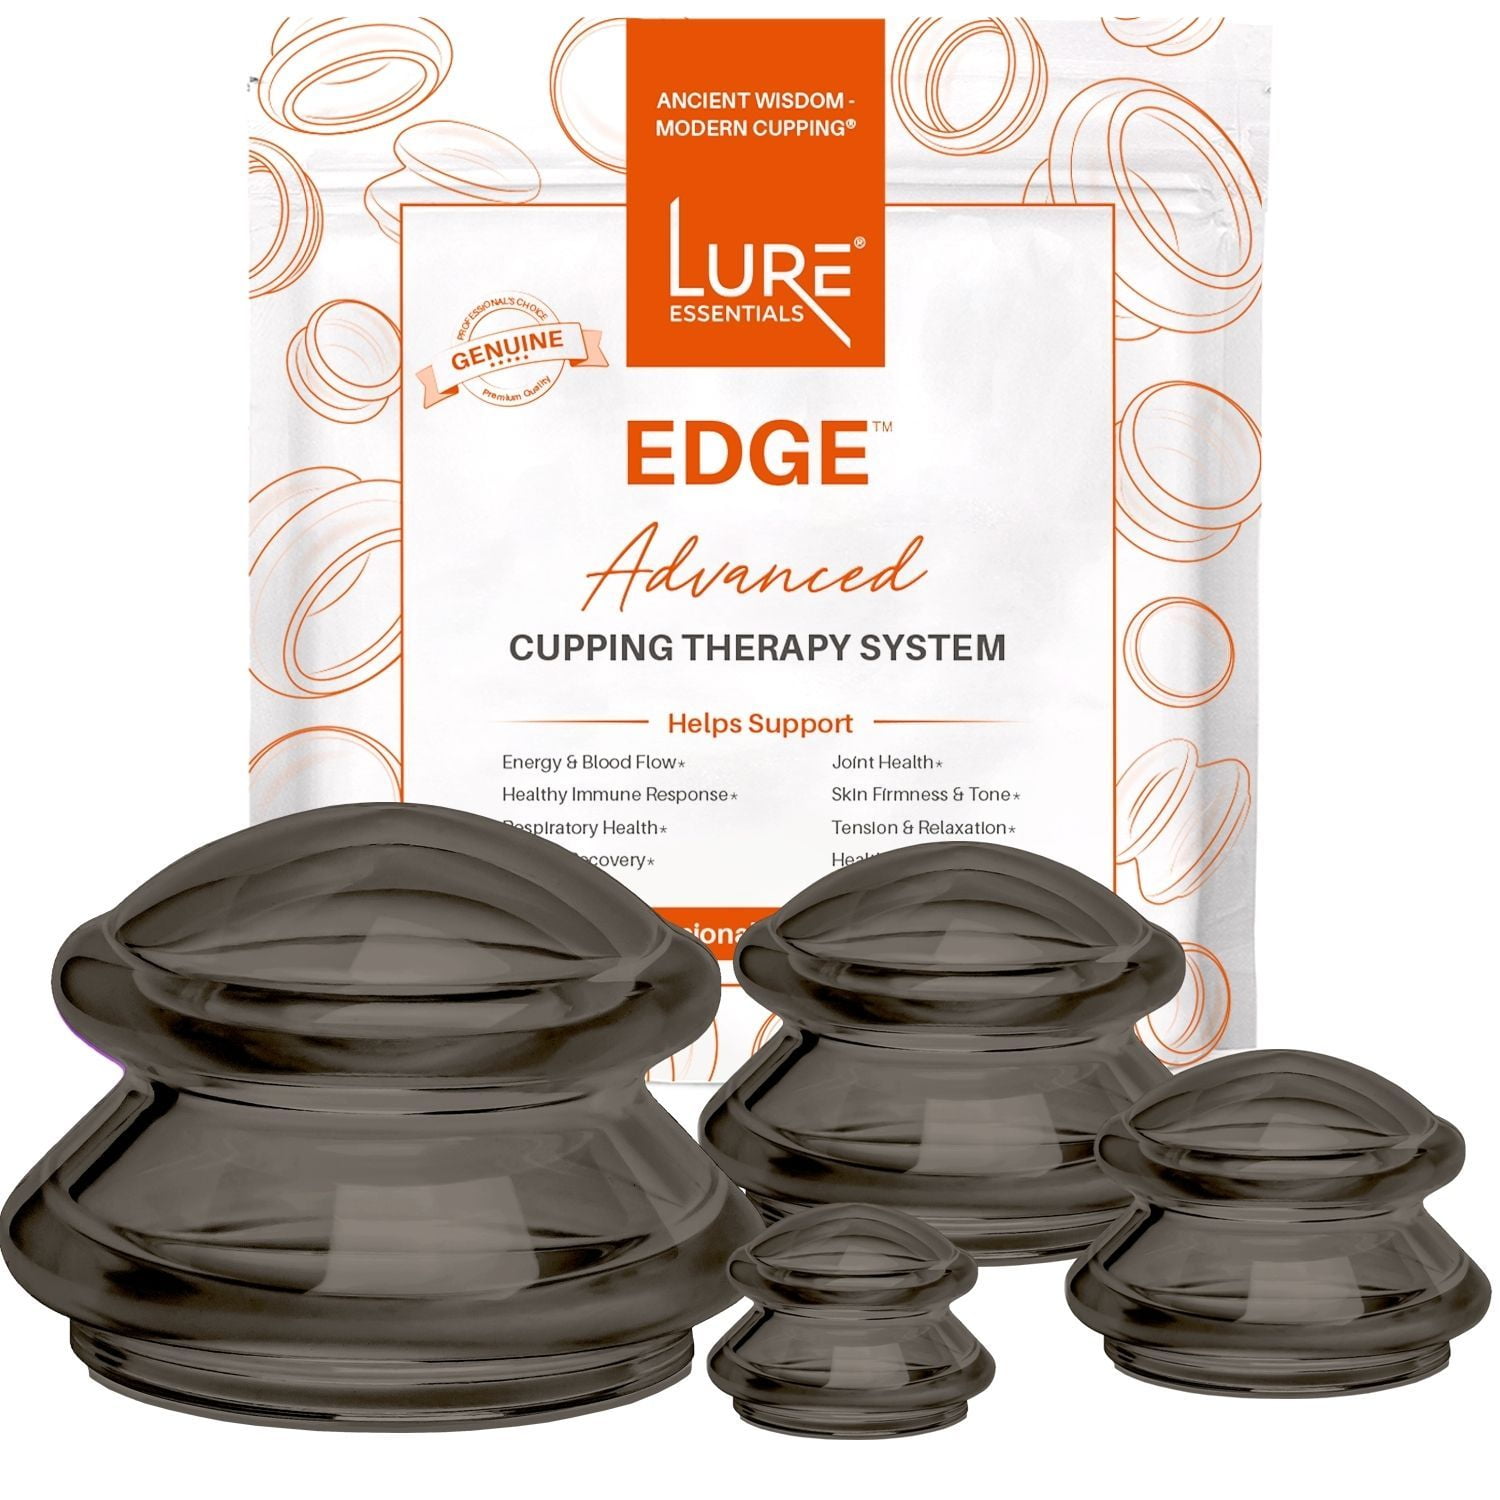 LURE Essentials Edge Cupping Set – Ultra Onyx Silicone Cupping Therapy Set  for Cellulite Reduction and Myofascial Release - Massage Therapists and